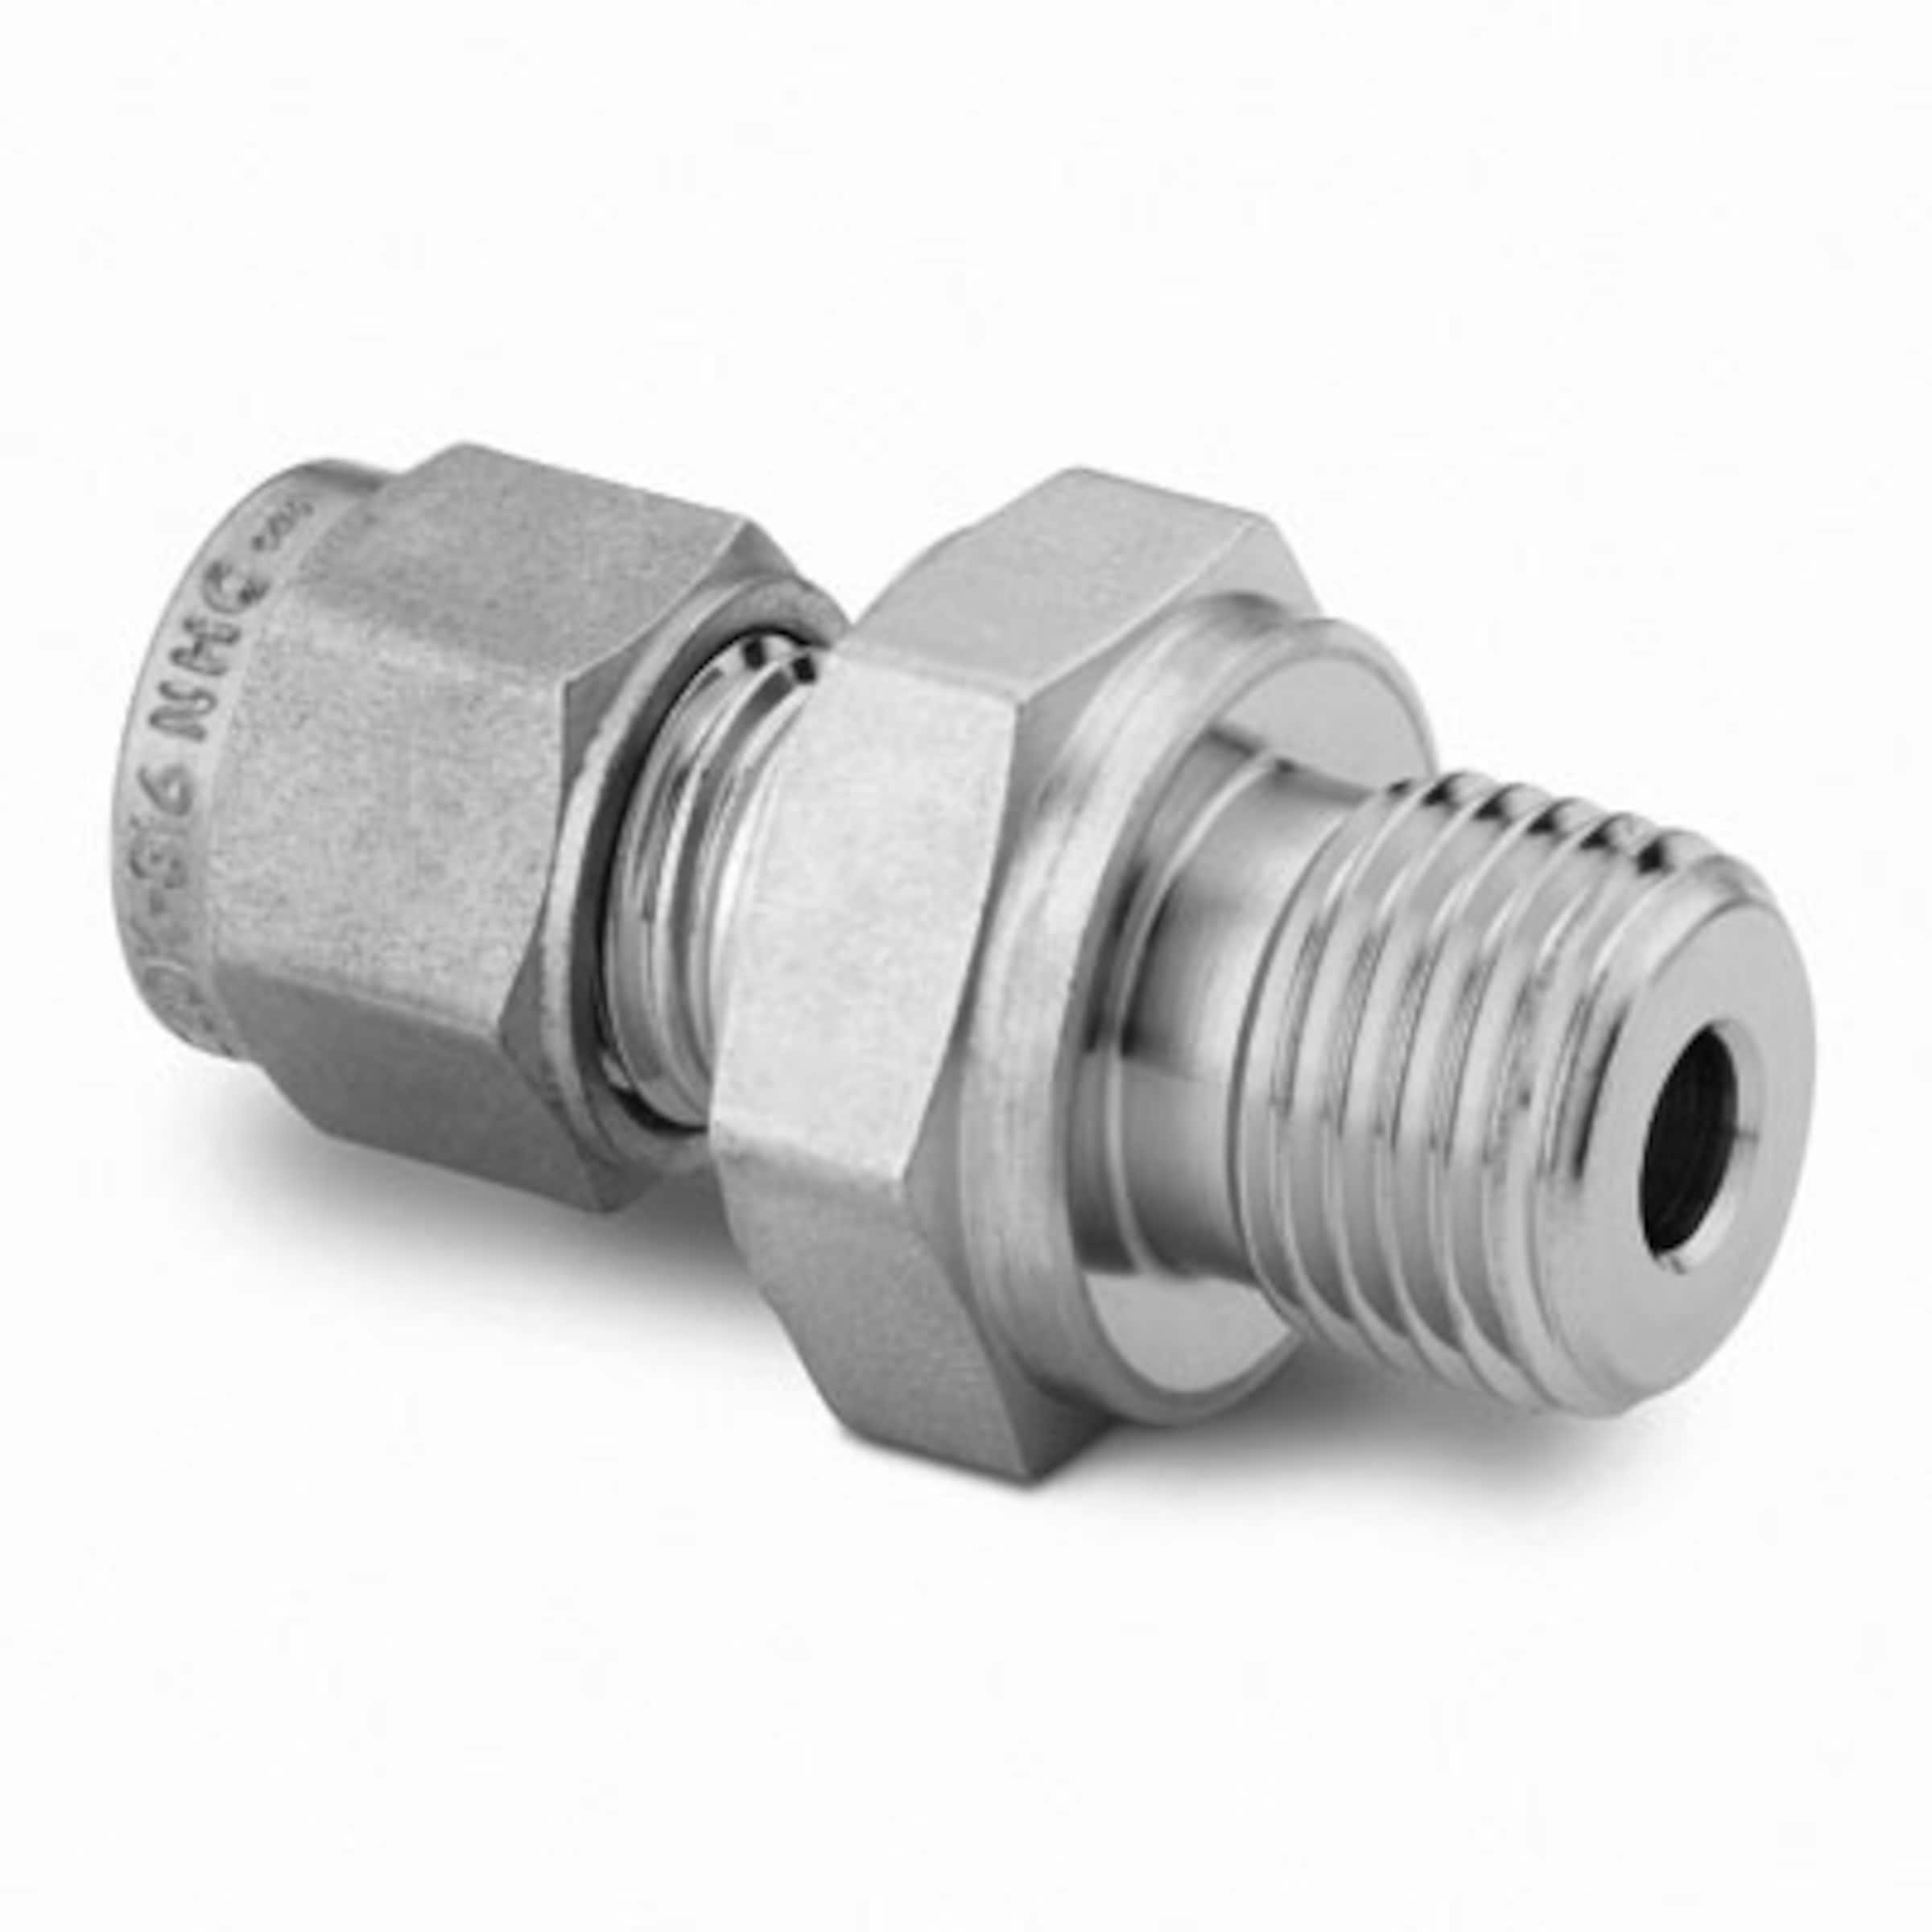 Waters, Valco, SSI & Parker Fittings for 1/16 OD Tubing - Optimize  Technologies